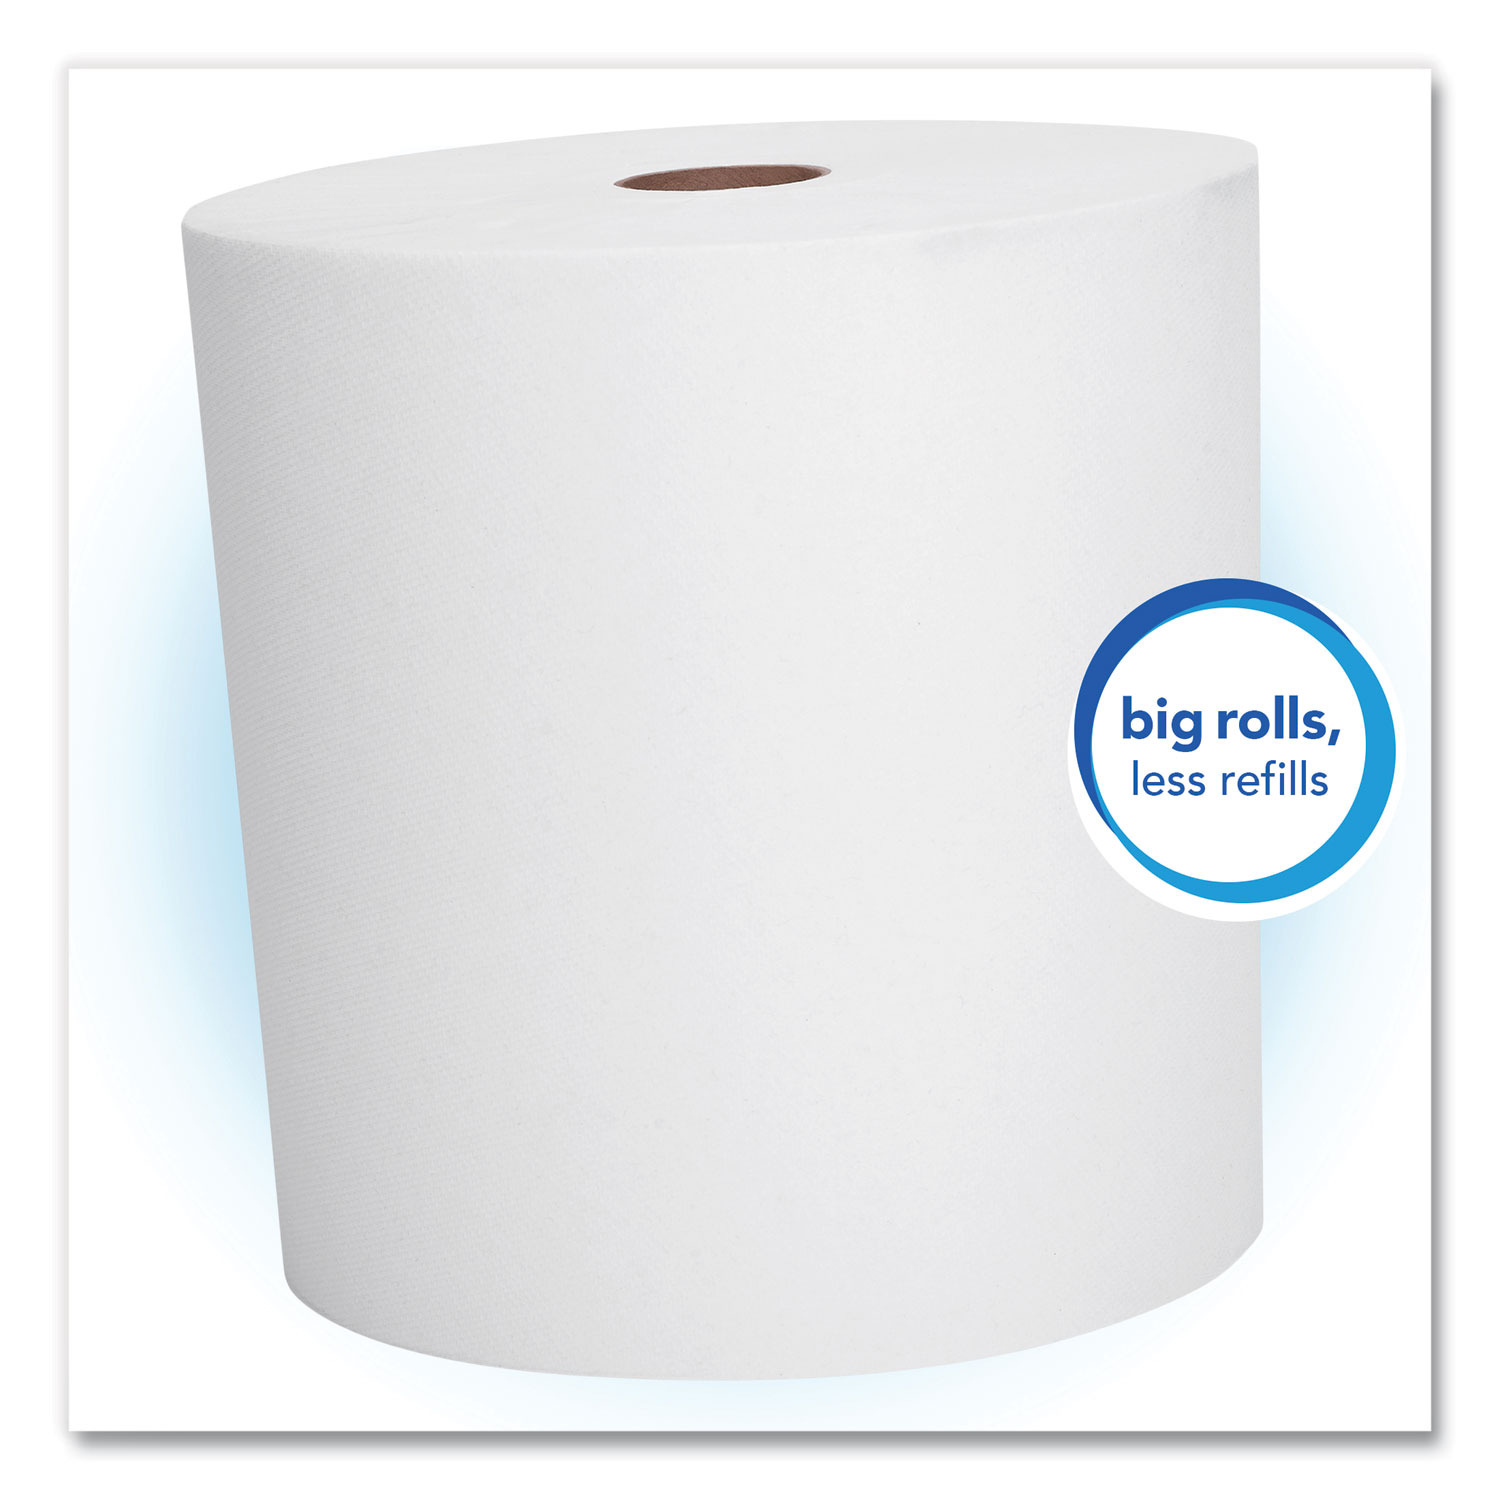 Scott Essential High Capacity Hard Roll Towels for Business, 1.75" Core, 8 x 950 ft, White,6 Rolls/CT -KCC02000 - image 5 of 7